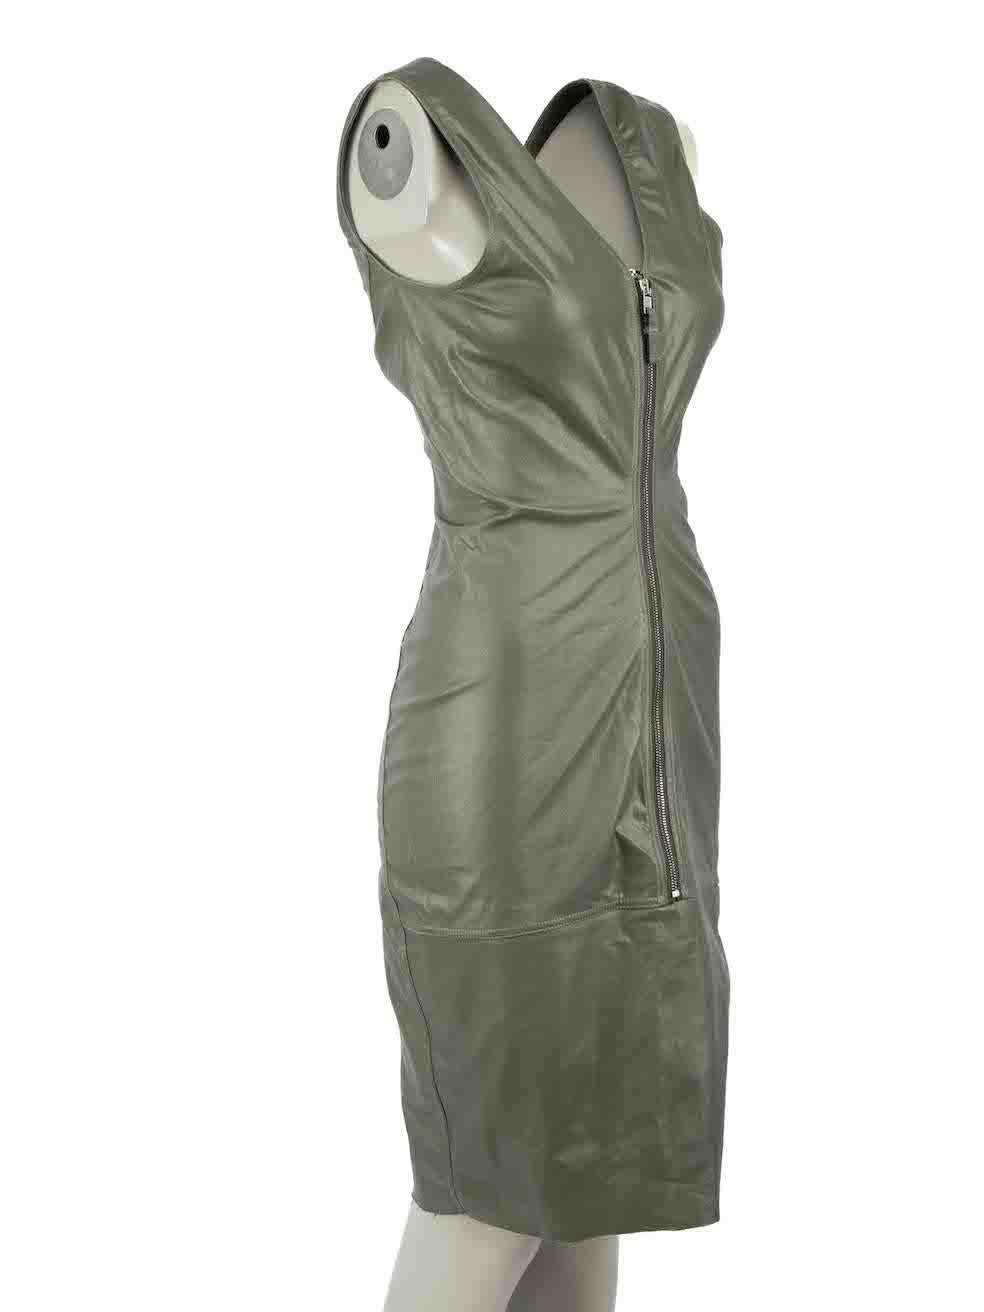 CONDITION is Good. General wear to dress is evident. Moderate signs of wear to the front and back with light marks to the cotton coating on this used Rick Owens designer resale item.
  
  Details
  Khaki
  Coated cotton
  Mini dress
  V neckline
 